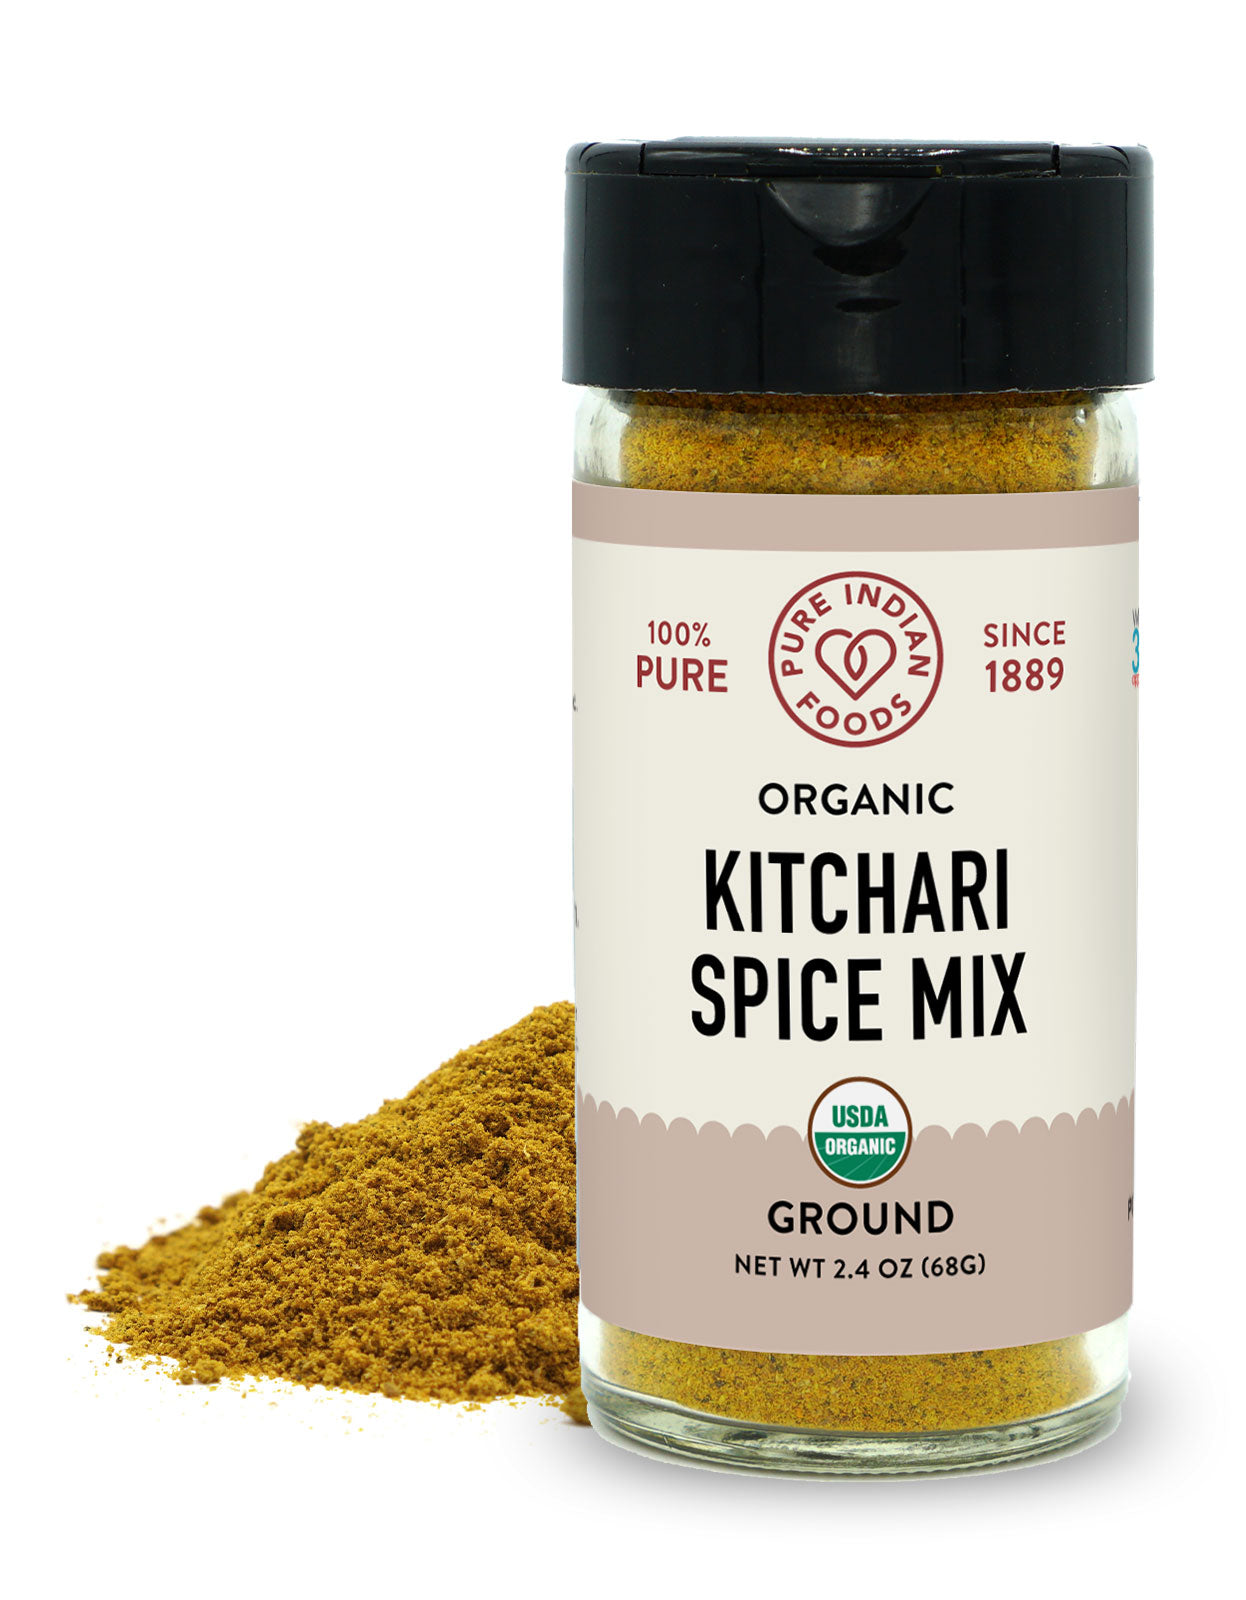 2.4 oz glass bottle of Pure Indian Foods Kitchari Spice Mix, organic and ground